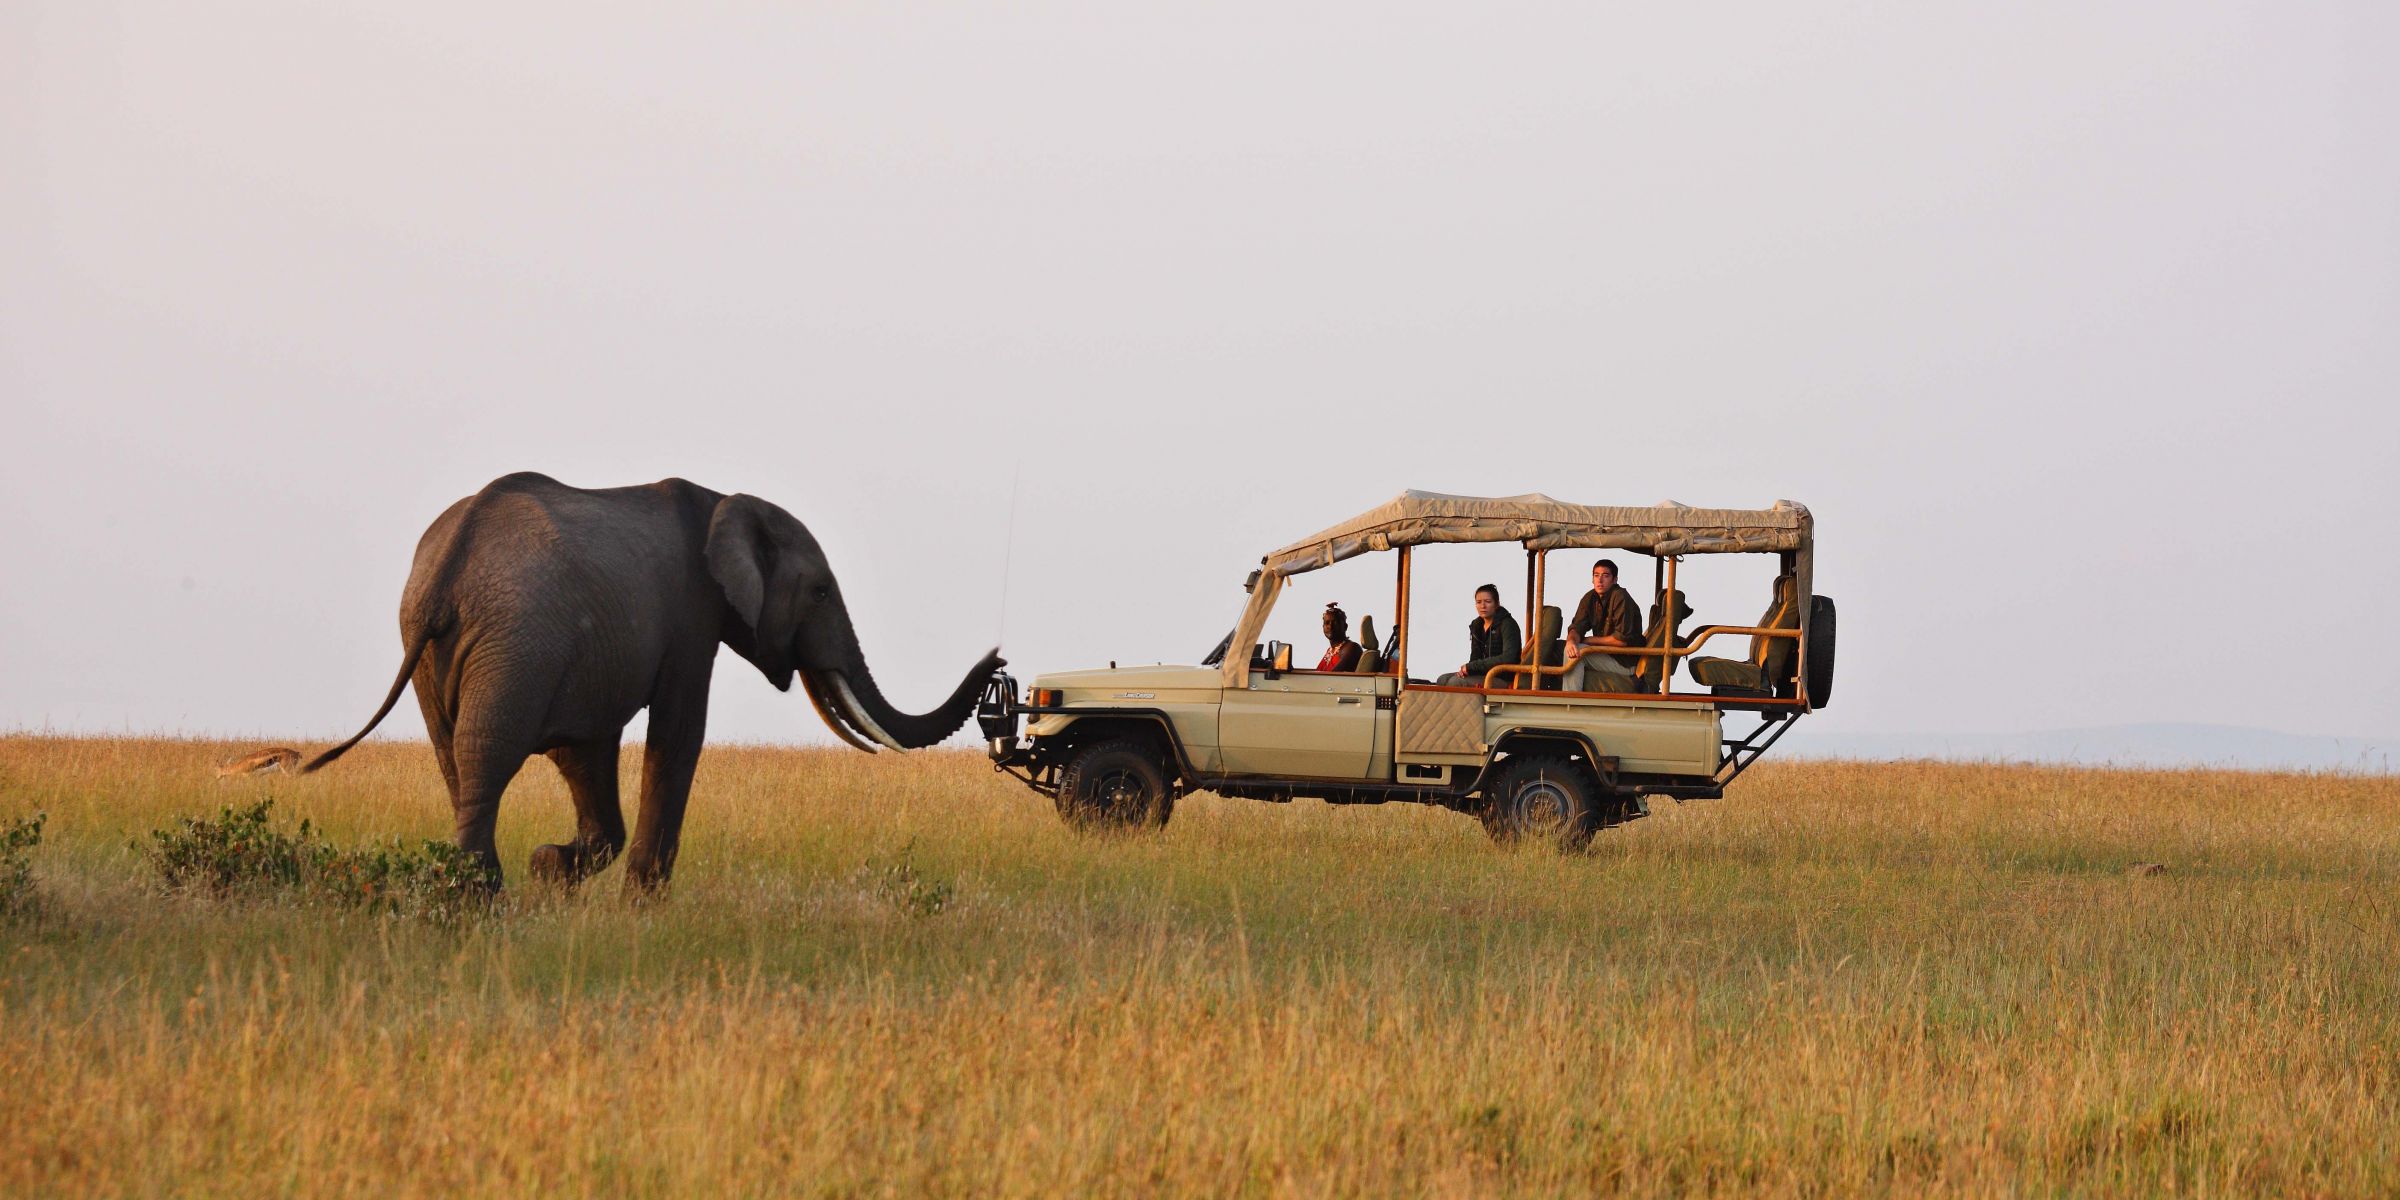 Sojourn Safaris Limited